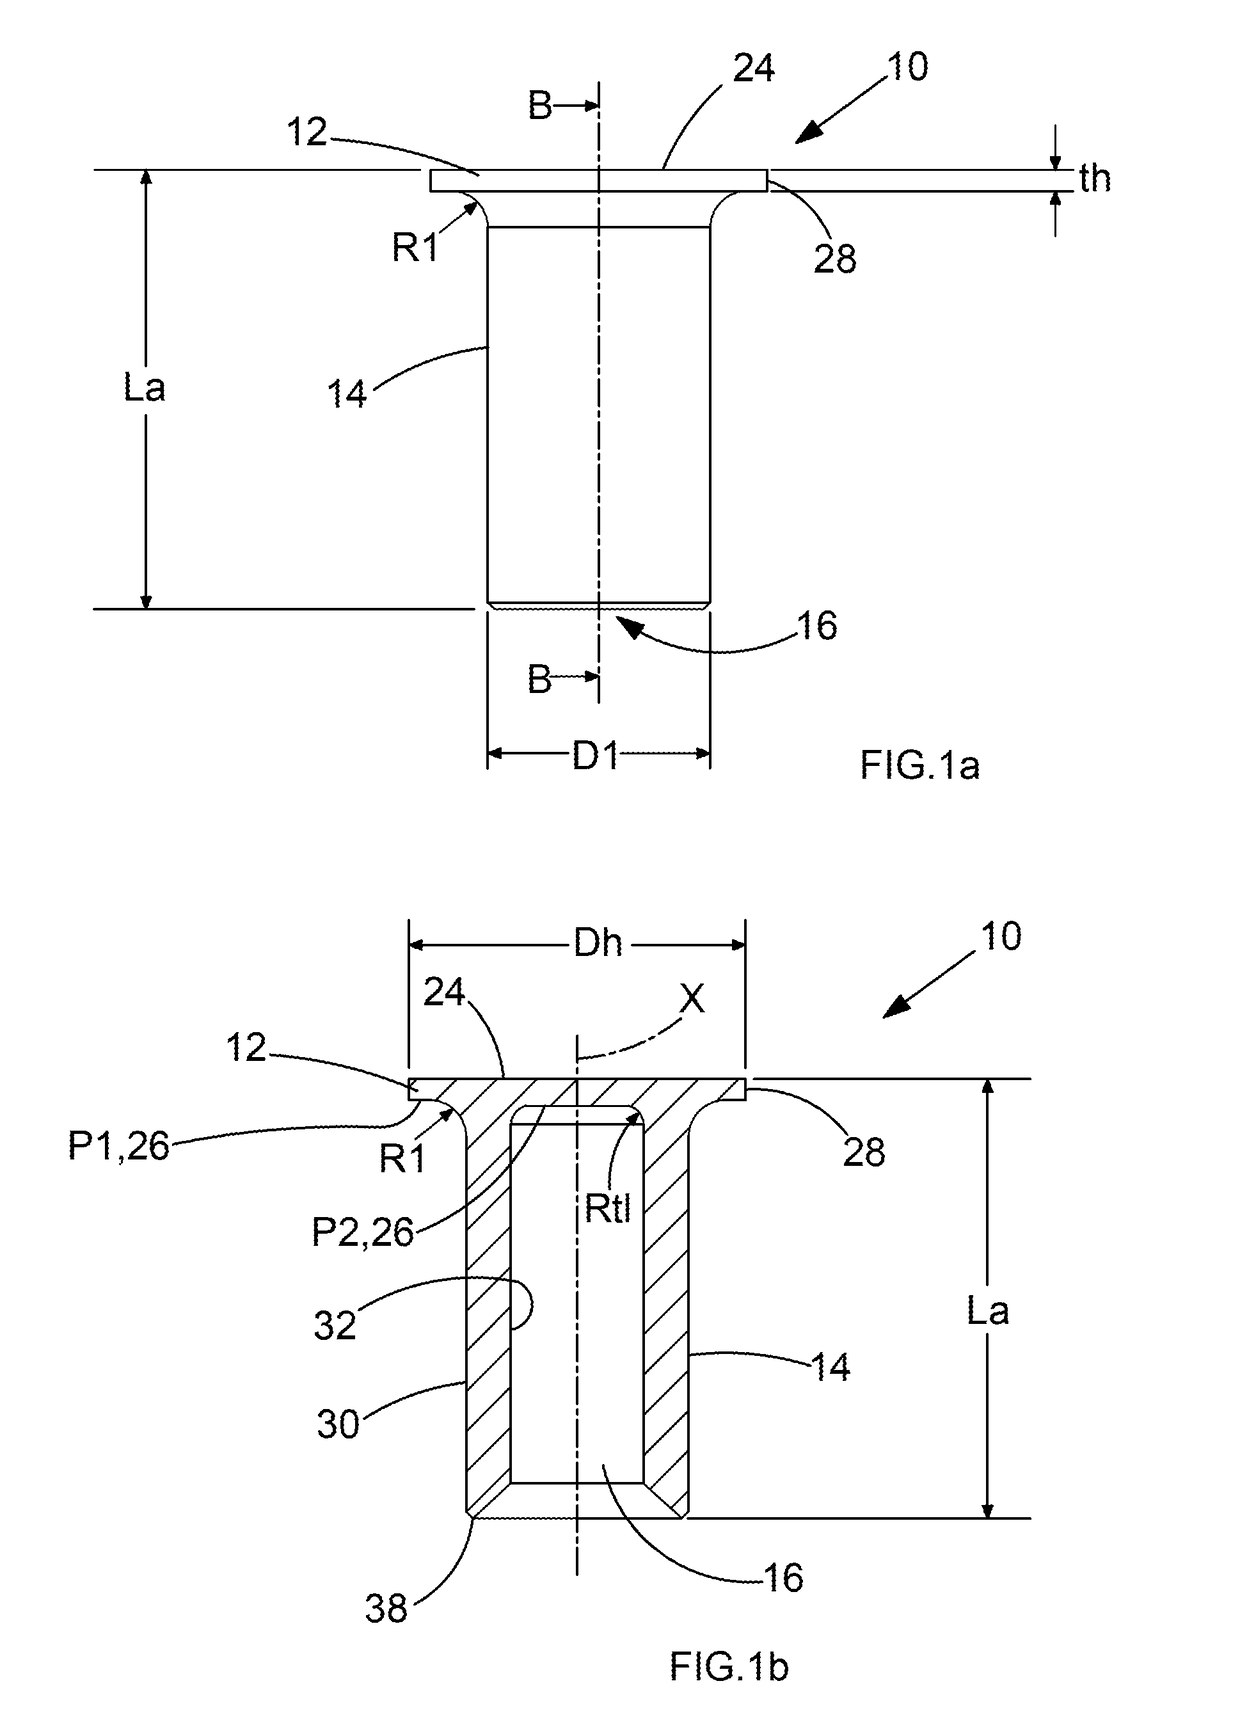 Self-piercing rivet, arrangement with a self-piercing rivet, and method for forming a joint in a stack of at least two sheets of material